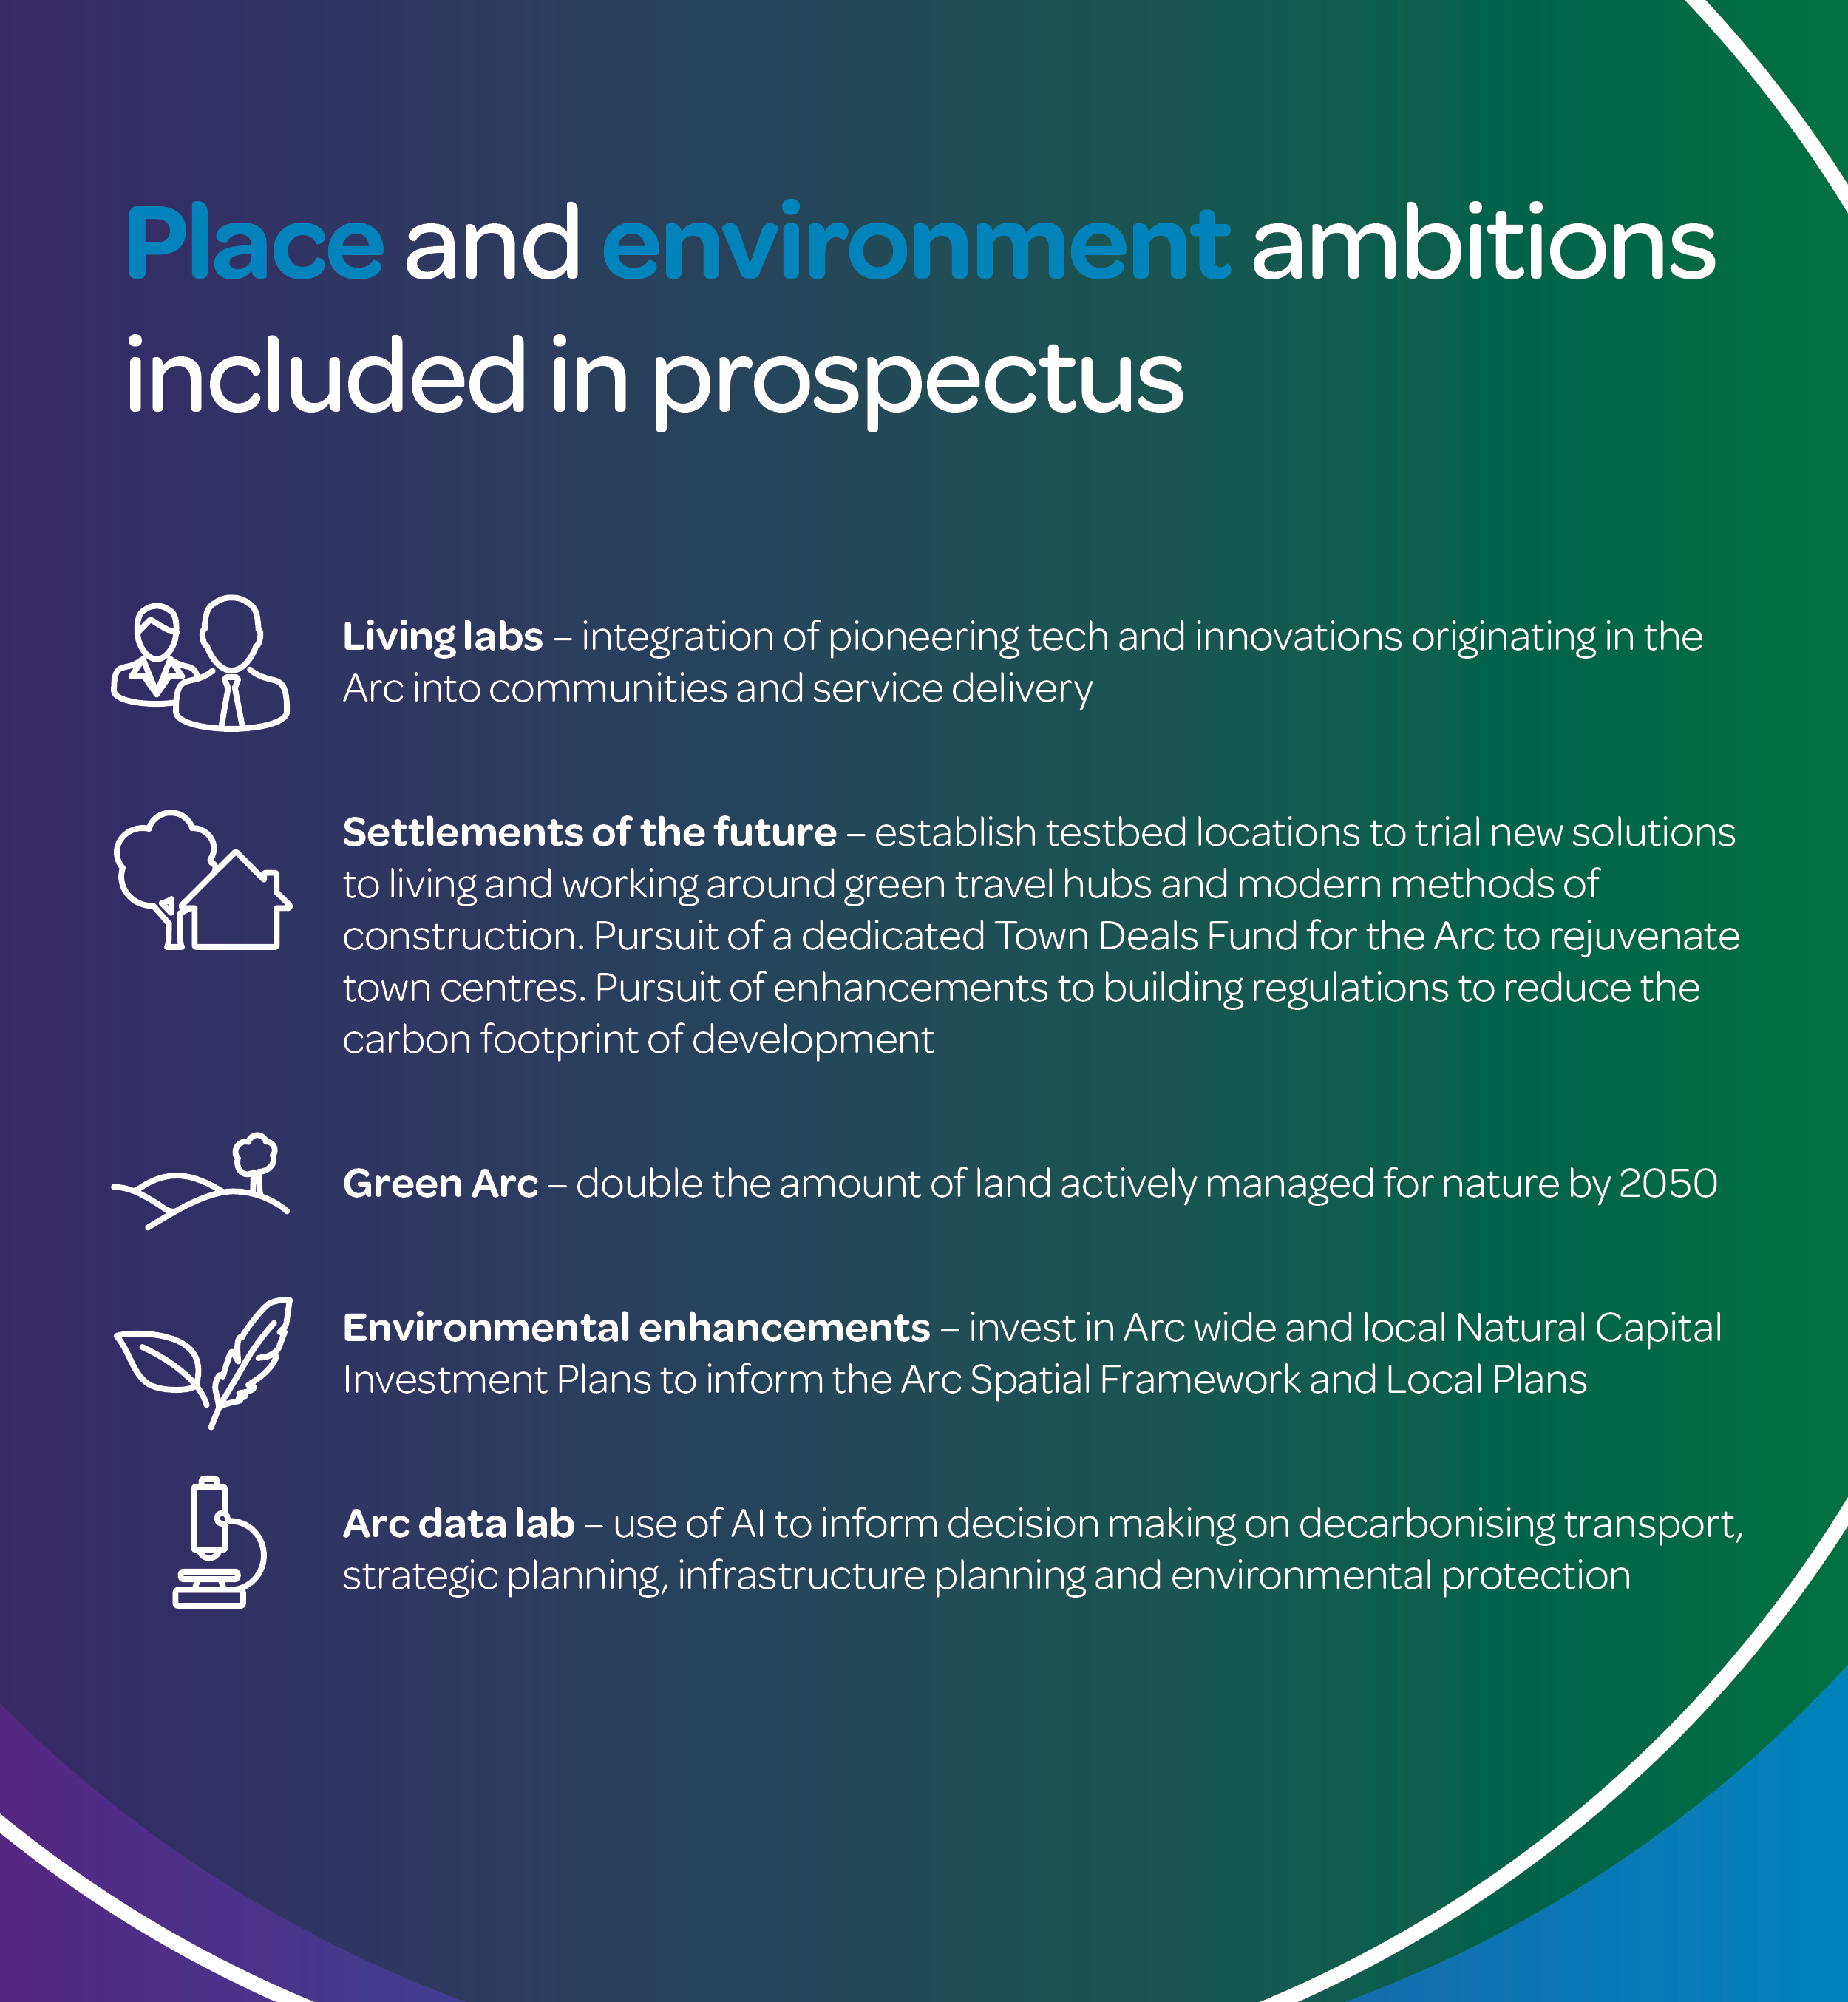 Place and environment ambitions included in prospectus